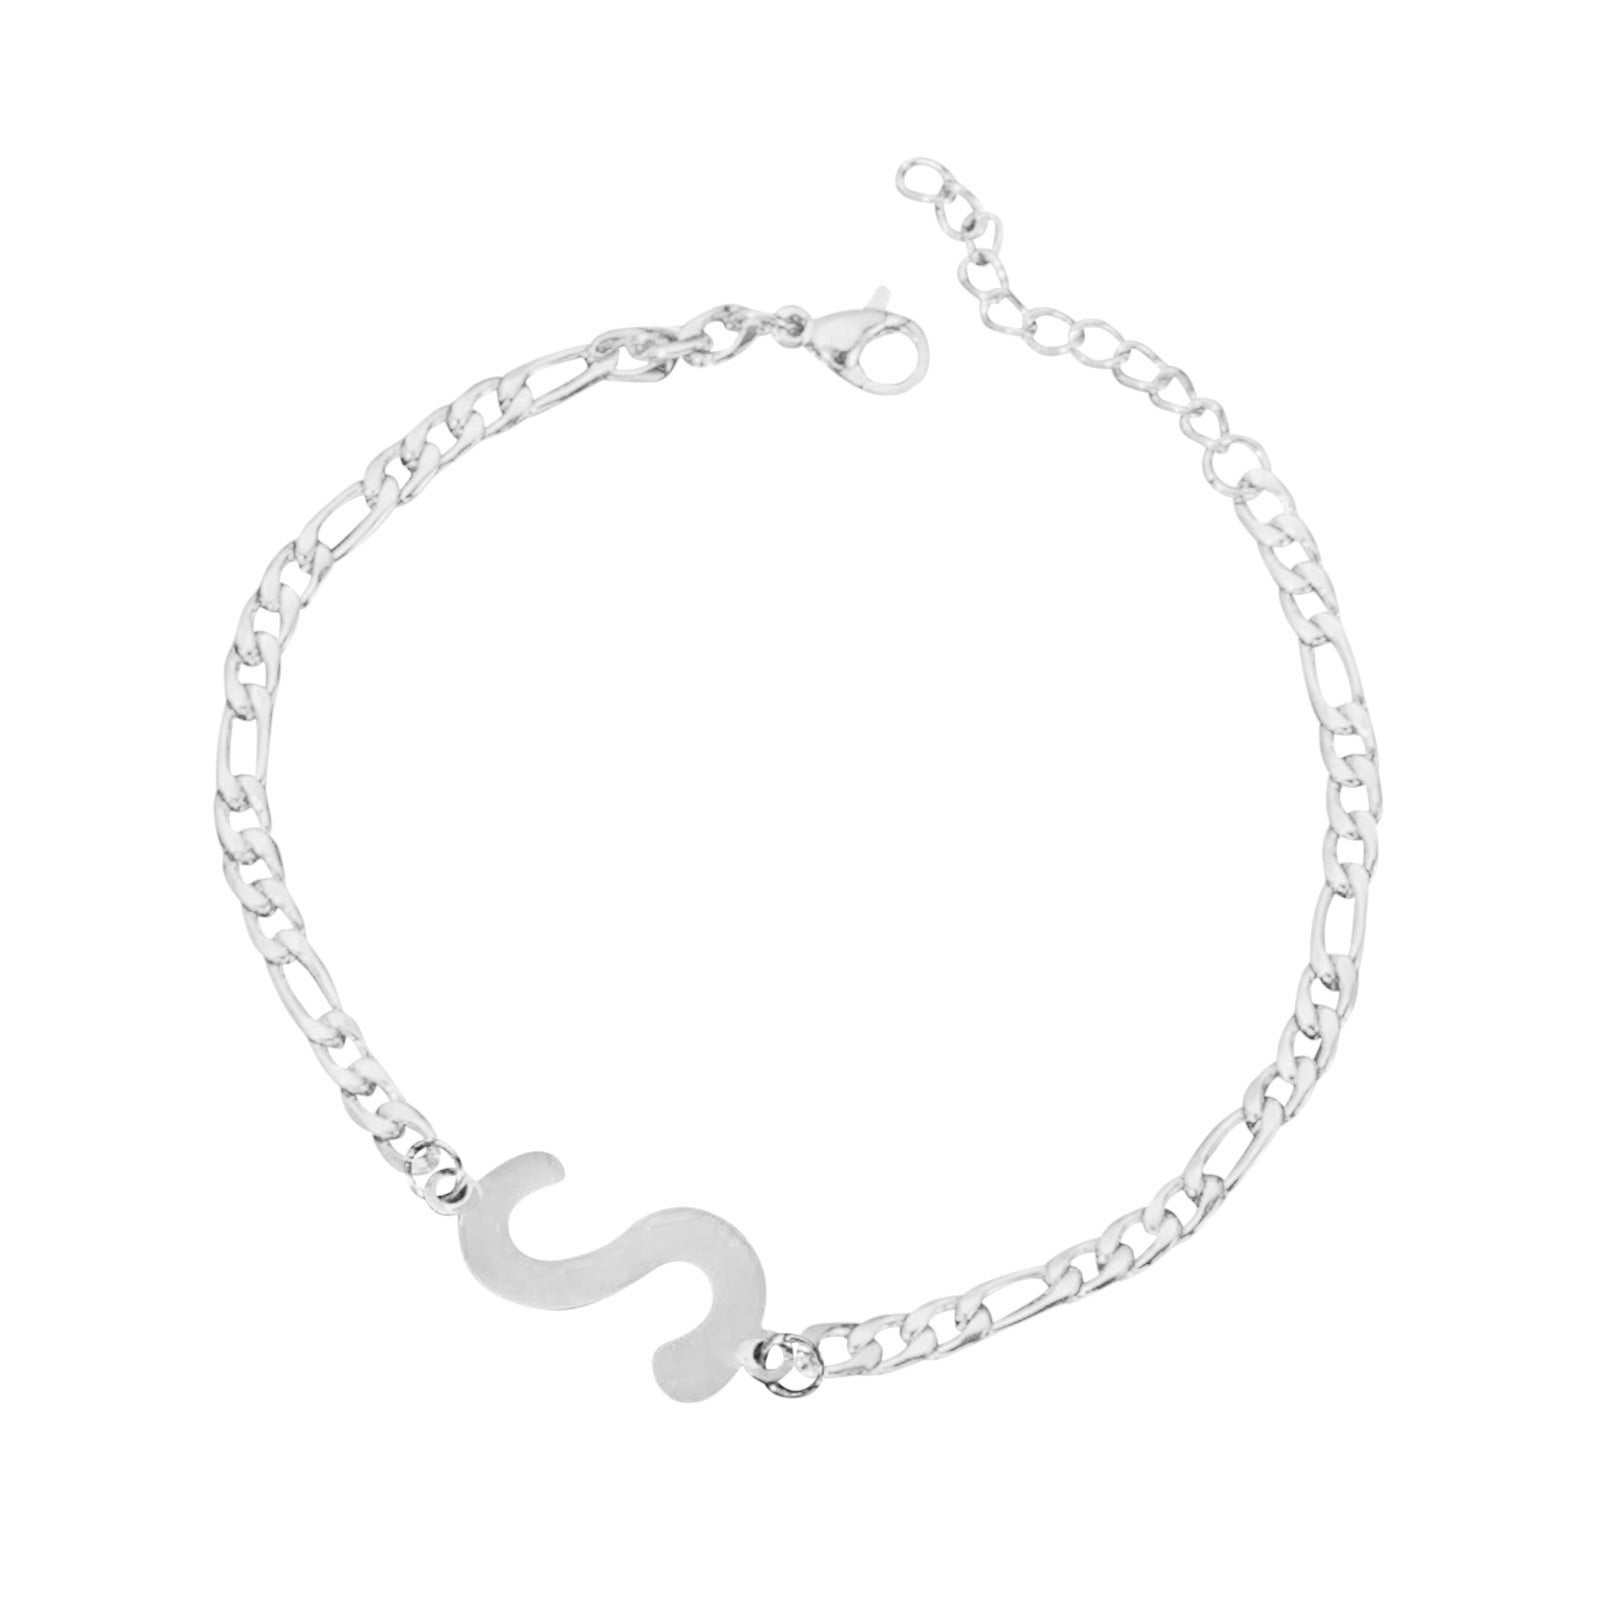 Initial Bracelets | Reflection of Memories